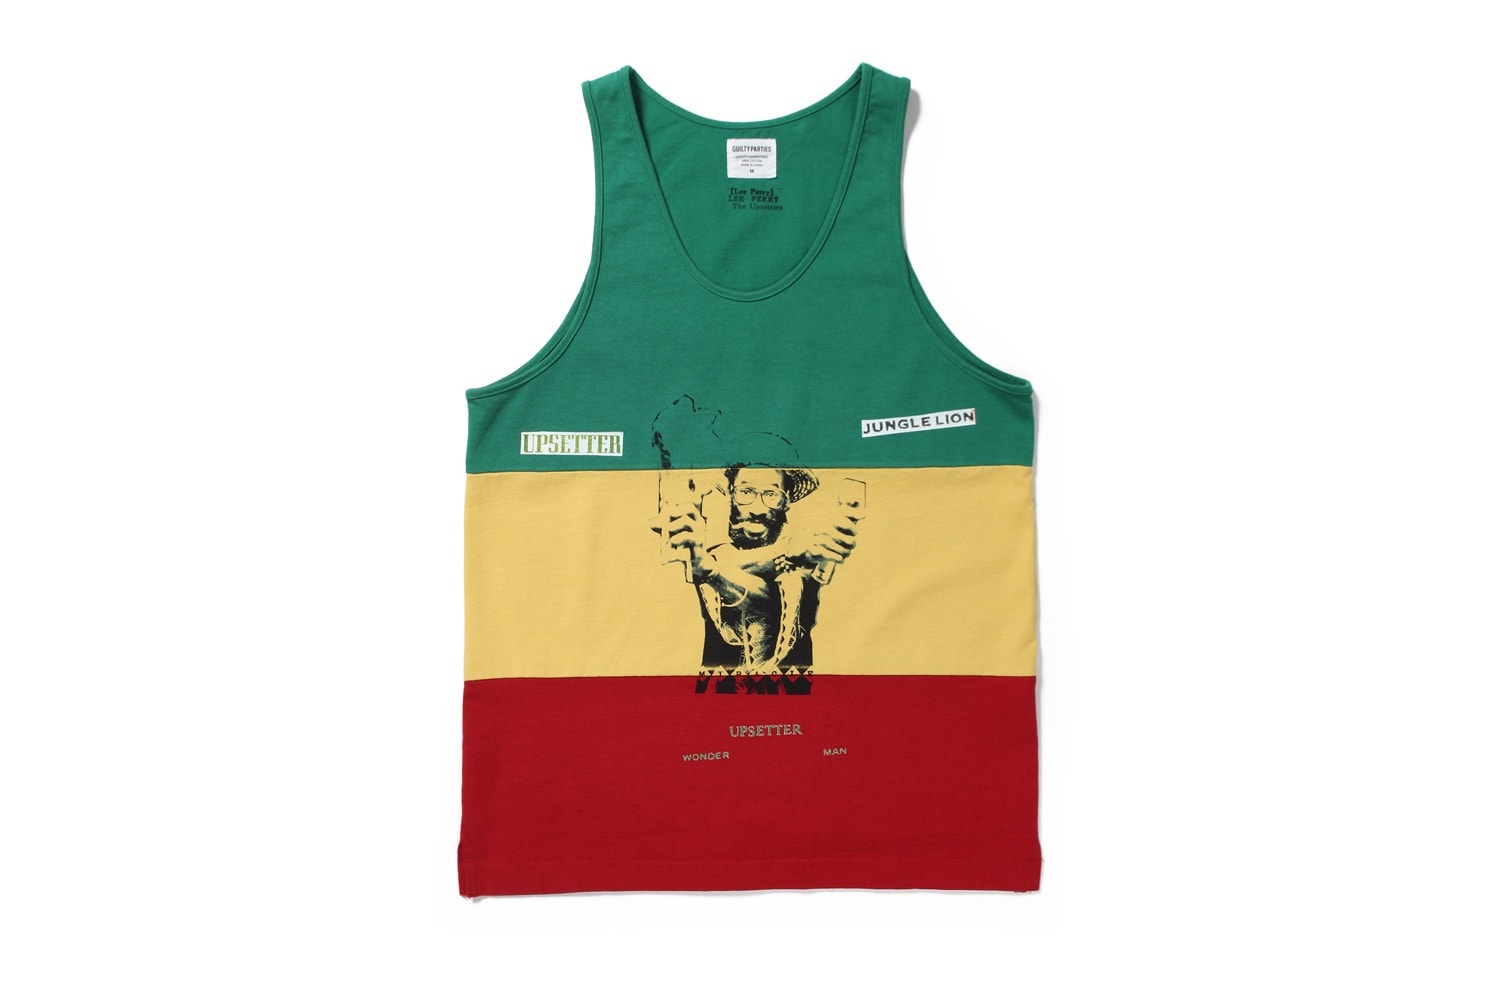 WACKO MARIA & Lee Perry Collaborate Once More for New Capsule Collection